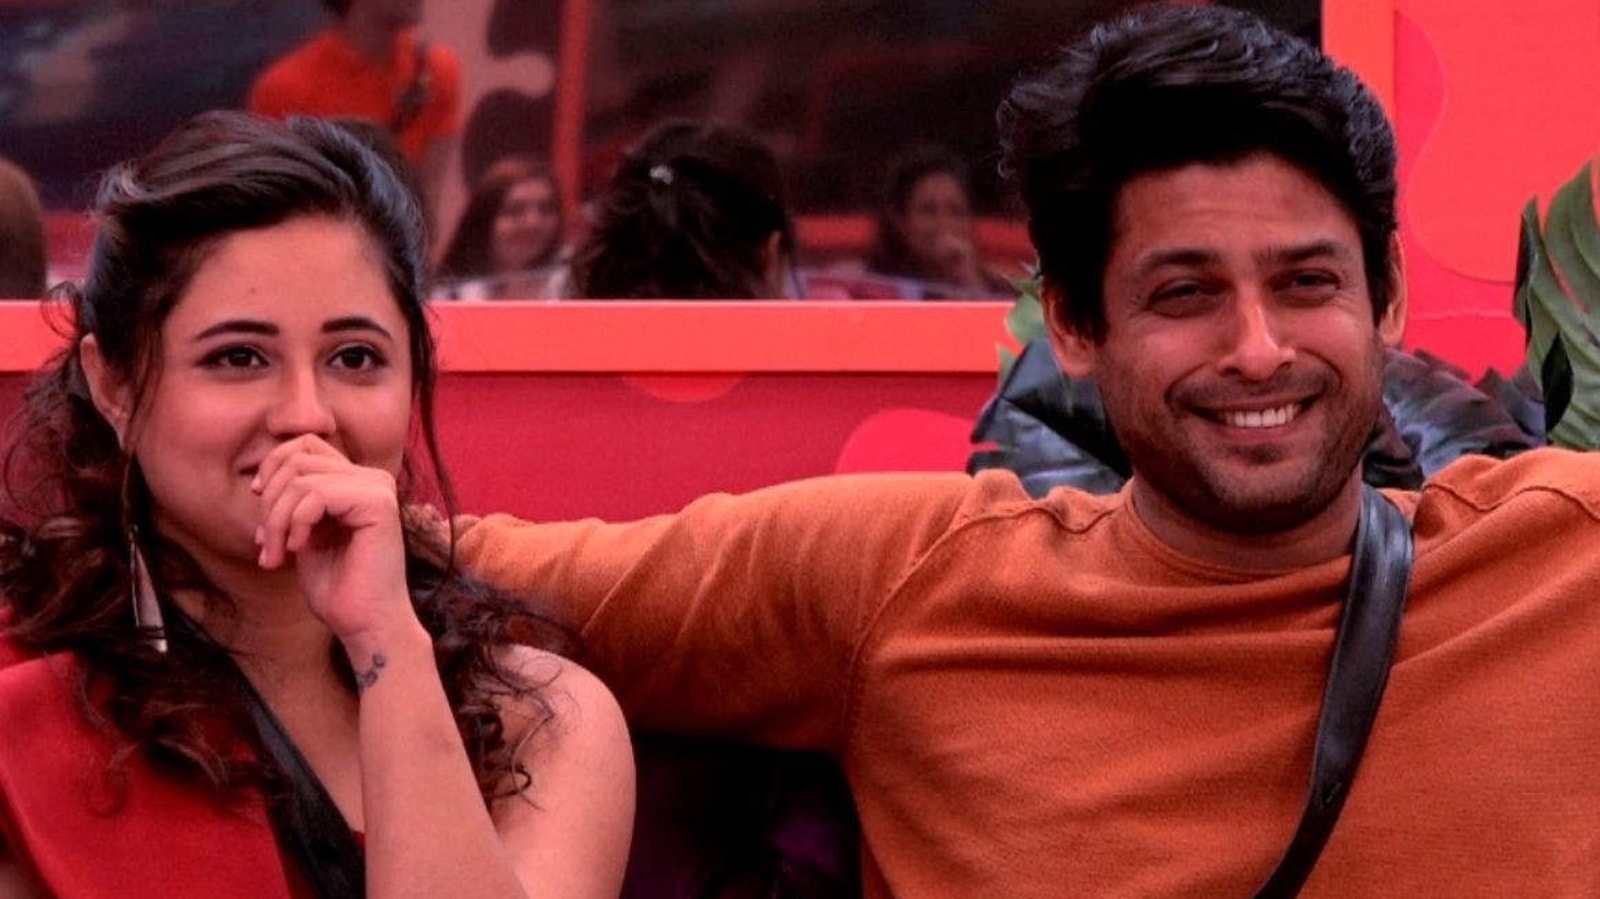 Rashami Desai opens up on misconceptions about her equation with Sidharth Shukla: ‘Our journey was only known to us’